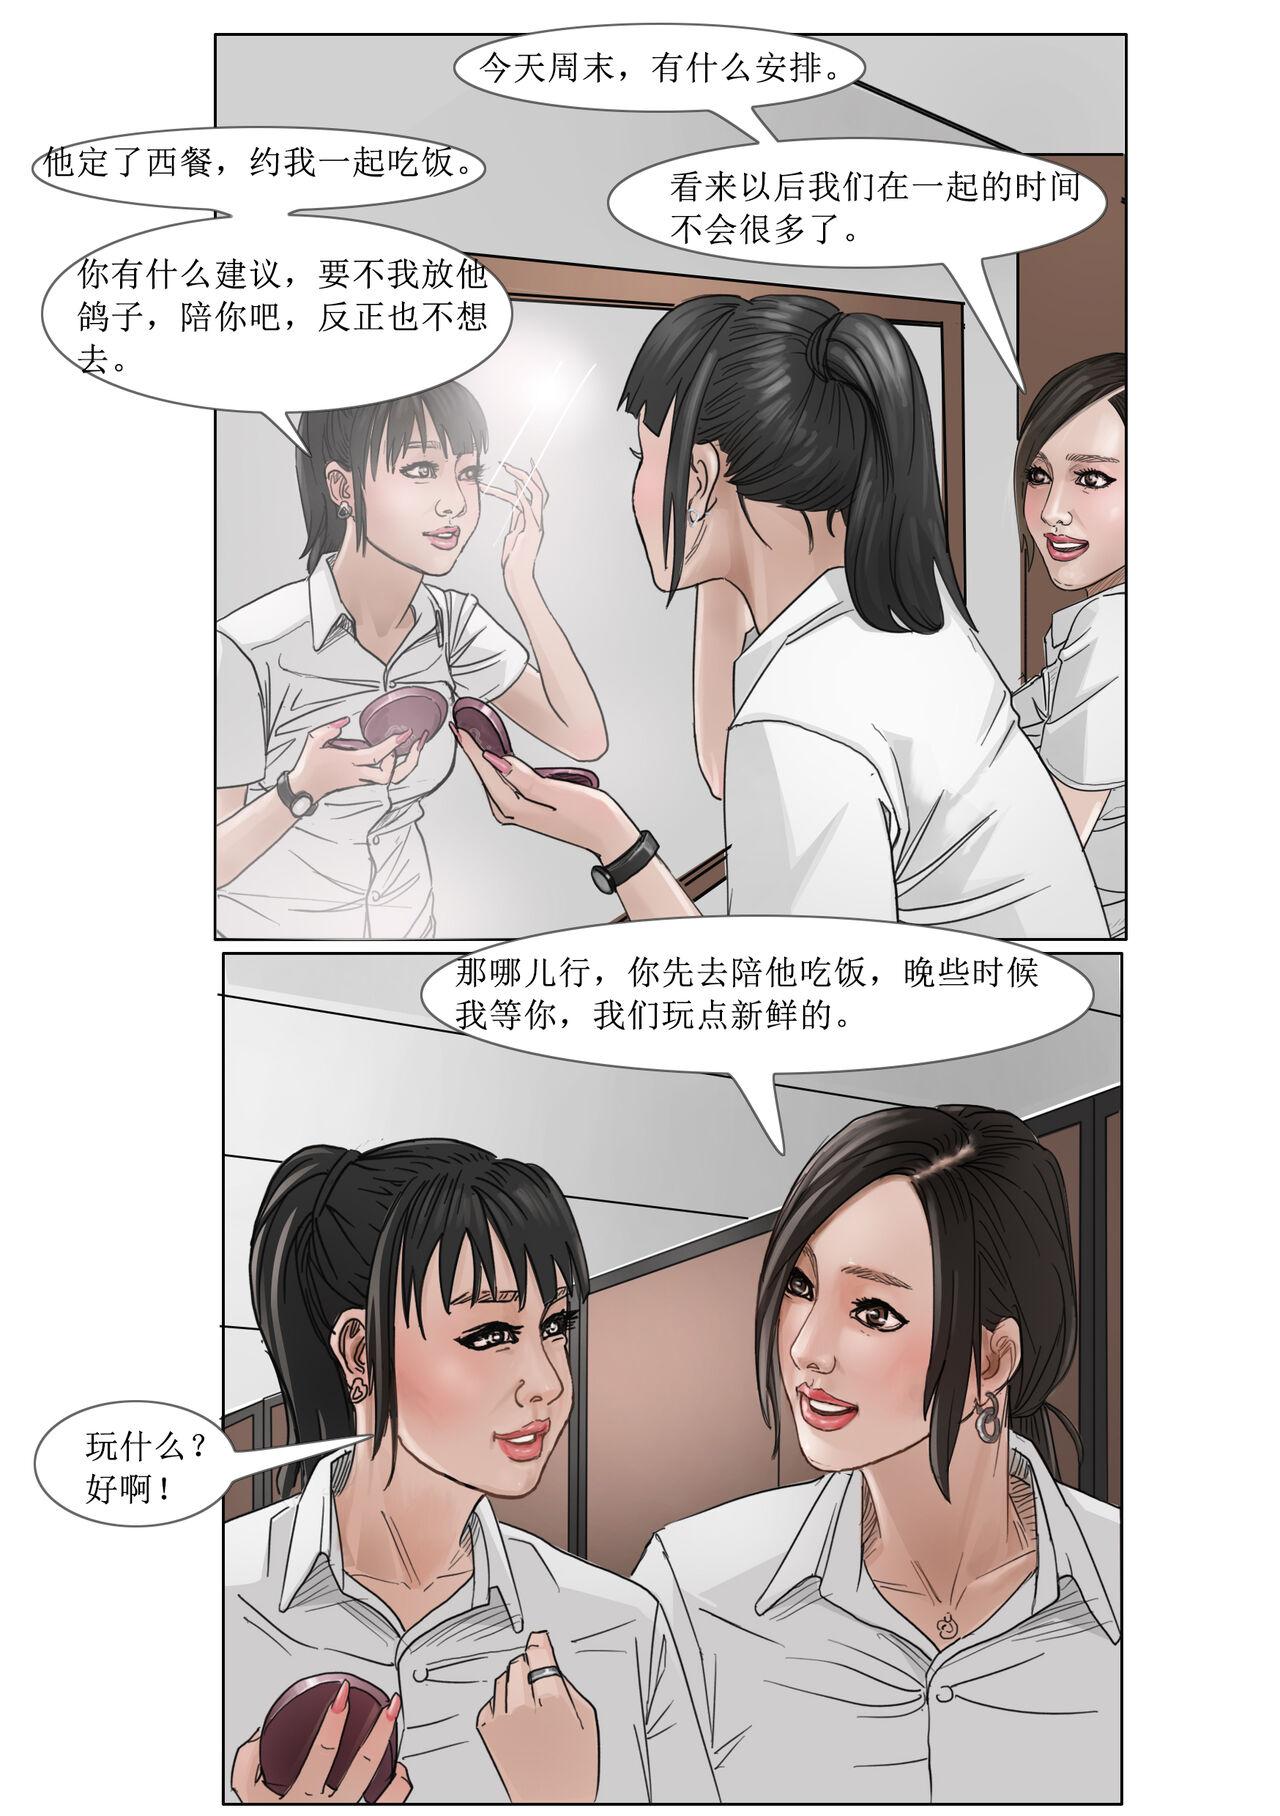 Secret 枫语Foryou《阿花与阿朵》第一话 A hua and A duo 1 Chinese Footworship - Page 10